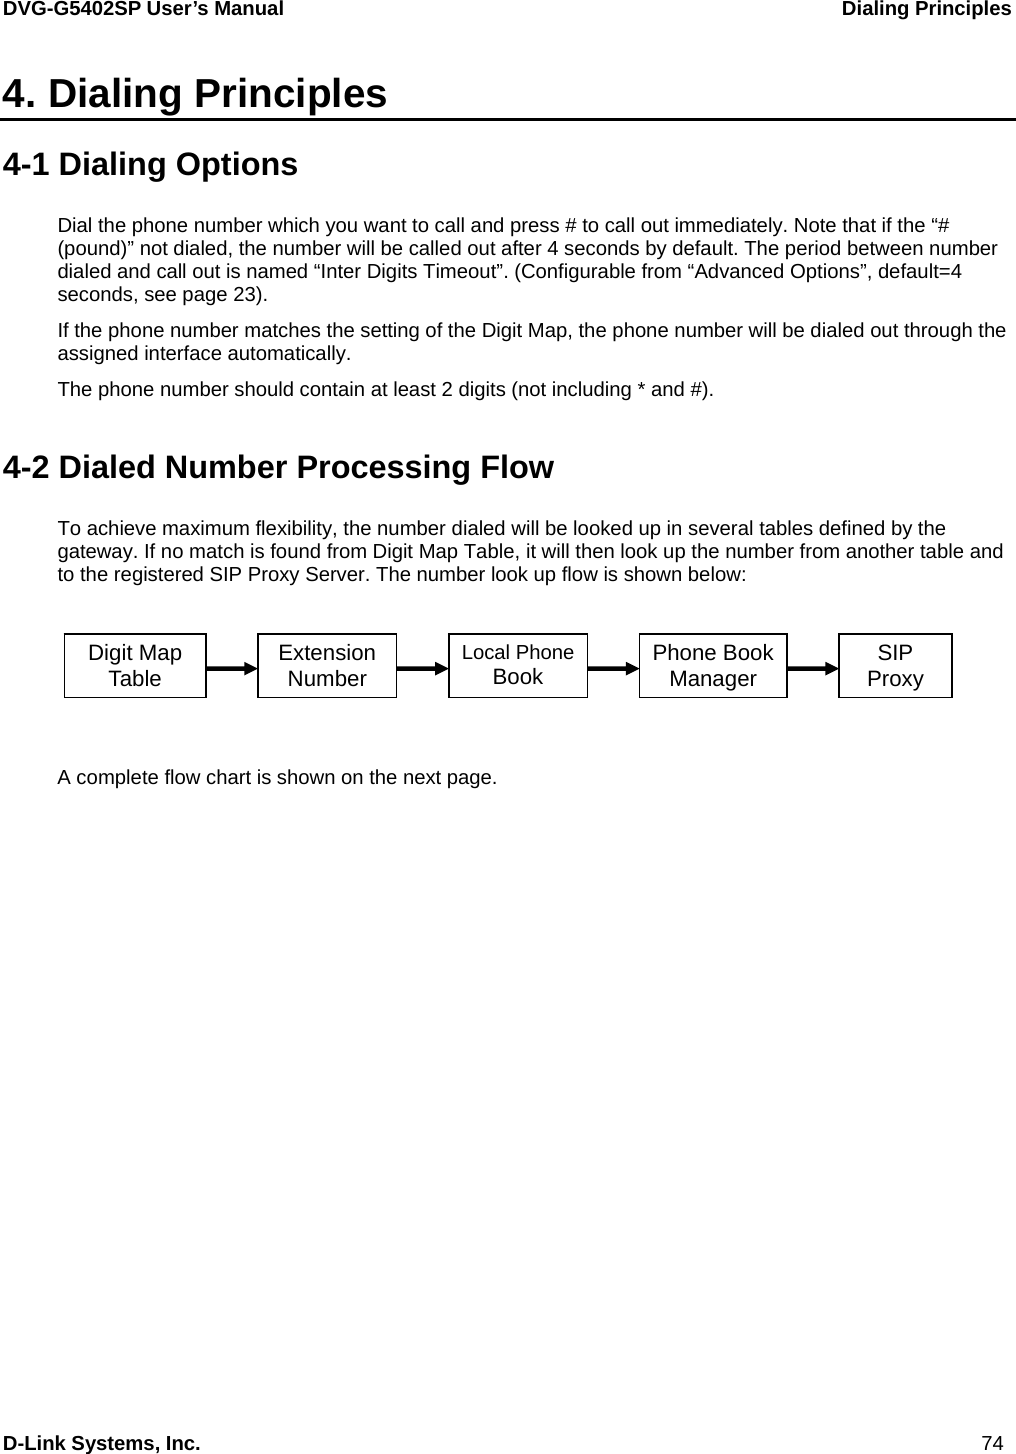 DVG-G5402SP User’s Manual                            Dialing Principles D-Link Systems, Inc.                                                                             74 4. Dialing Principles 4-1 Dialing Options Dial the phone number which you want to call and press # to call out immediately. Note that if the “# (pound)” not dialed, the number will be called out after 4 seconds by default. The period between number dialed and call out is named “Inter Digits Timeout”. (Configurable from “Advanced Options”, default=4 seconds, see page 23). If the phone number matches the setting of the Digit Map, the phone number will be dialed out through the assigned interface automatically. The phone number should contain at least 2 digits (not including * and #).  4-2 Dialed Number Processing Flow To achieve maximum flexibility, the number dialed will be looked up in several tables defined by the gateway. If no match is found from Digit Map Table, it will then look up the number from another table and to the registered SIP Proxy Server. The number look up flow is shown below:          A complete flow chart is shown on the next page. Digit Map Table  Extension Number Local PhoneBook  Phone Book Manager  SIP Proxy 